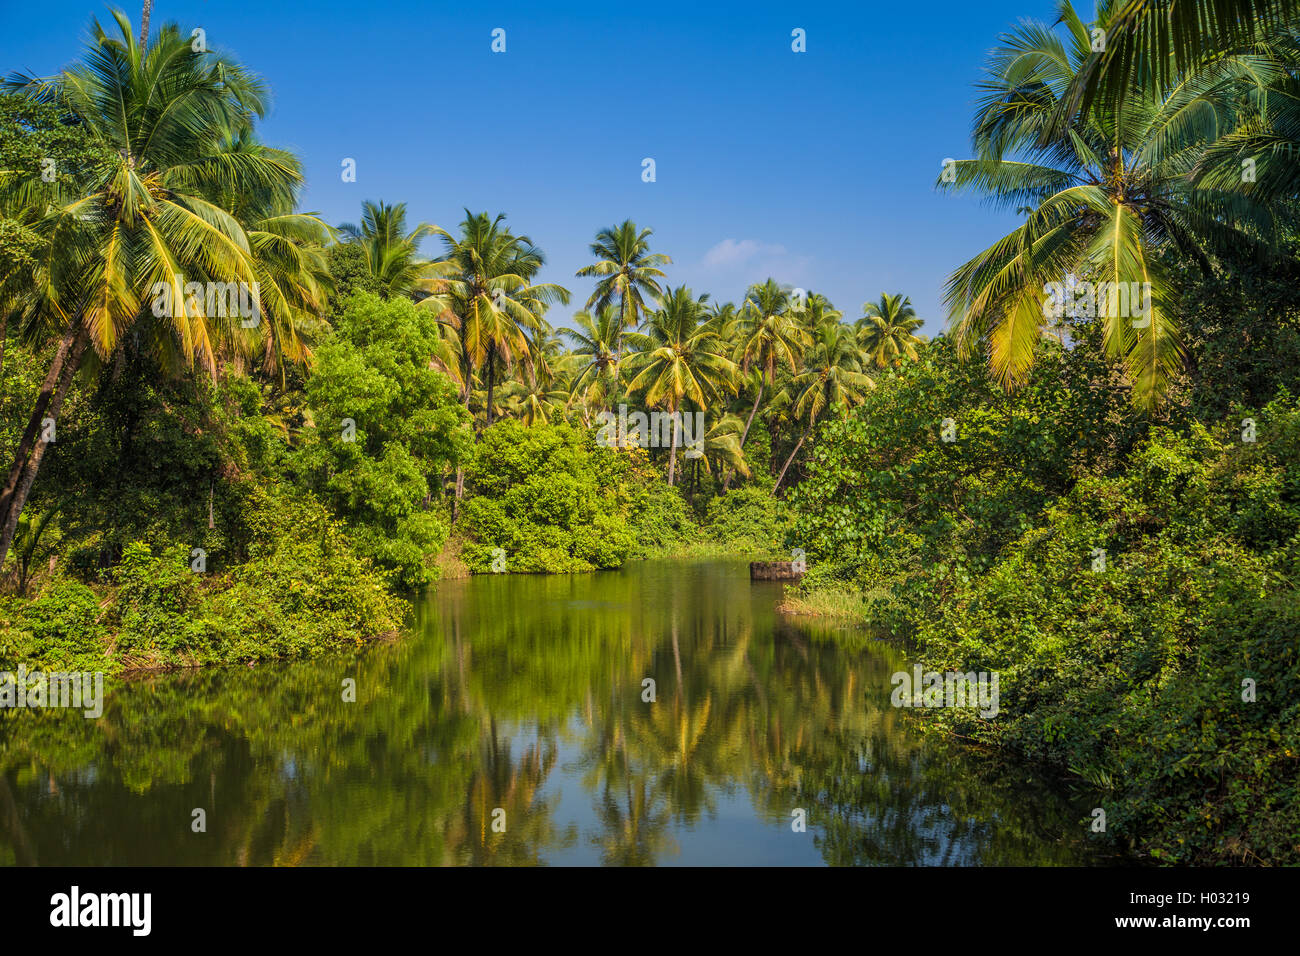 Beautiful tropical palm tree forest along river, Goa, India. Stock Photo